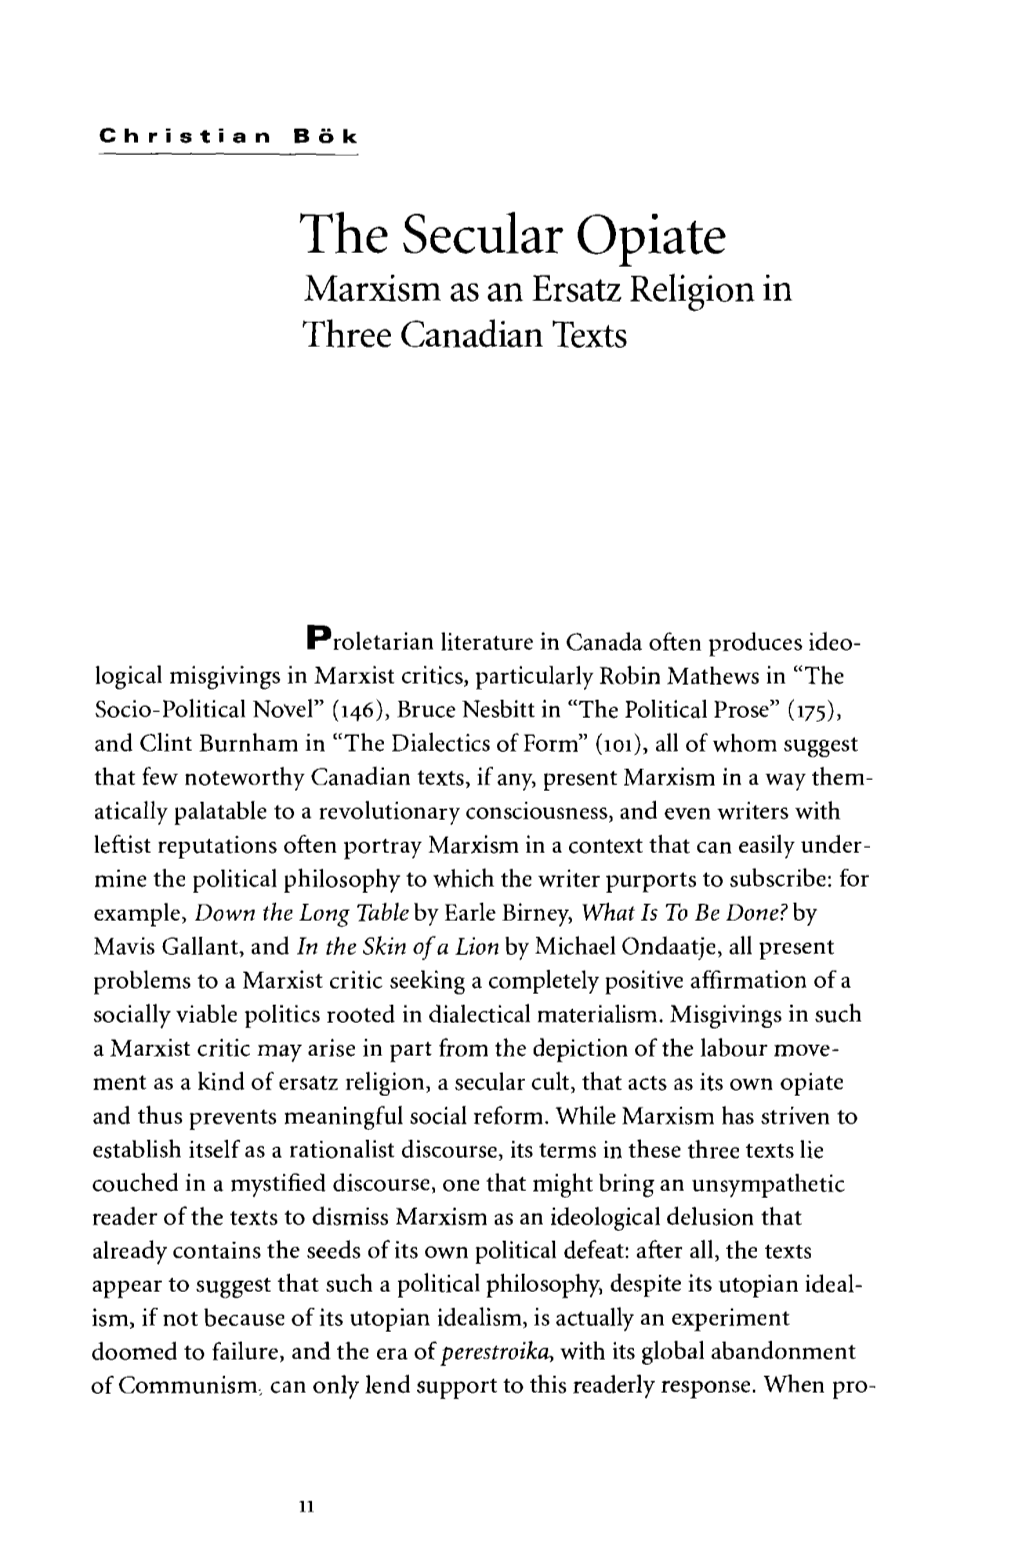 The Secular Opiate Marxism As an Ersatz Religion in Three Canadian Texts